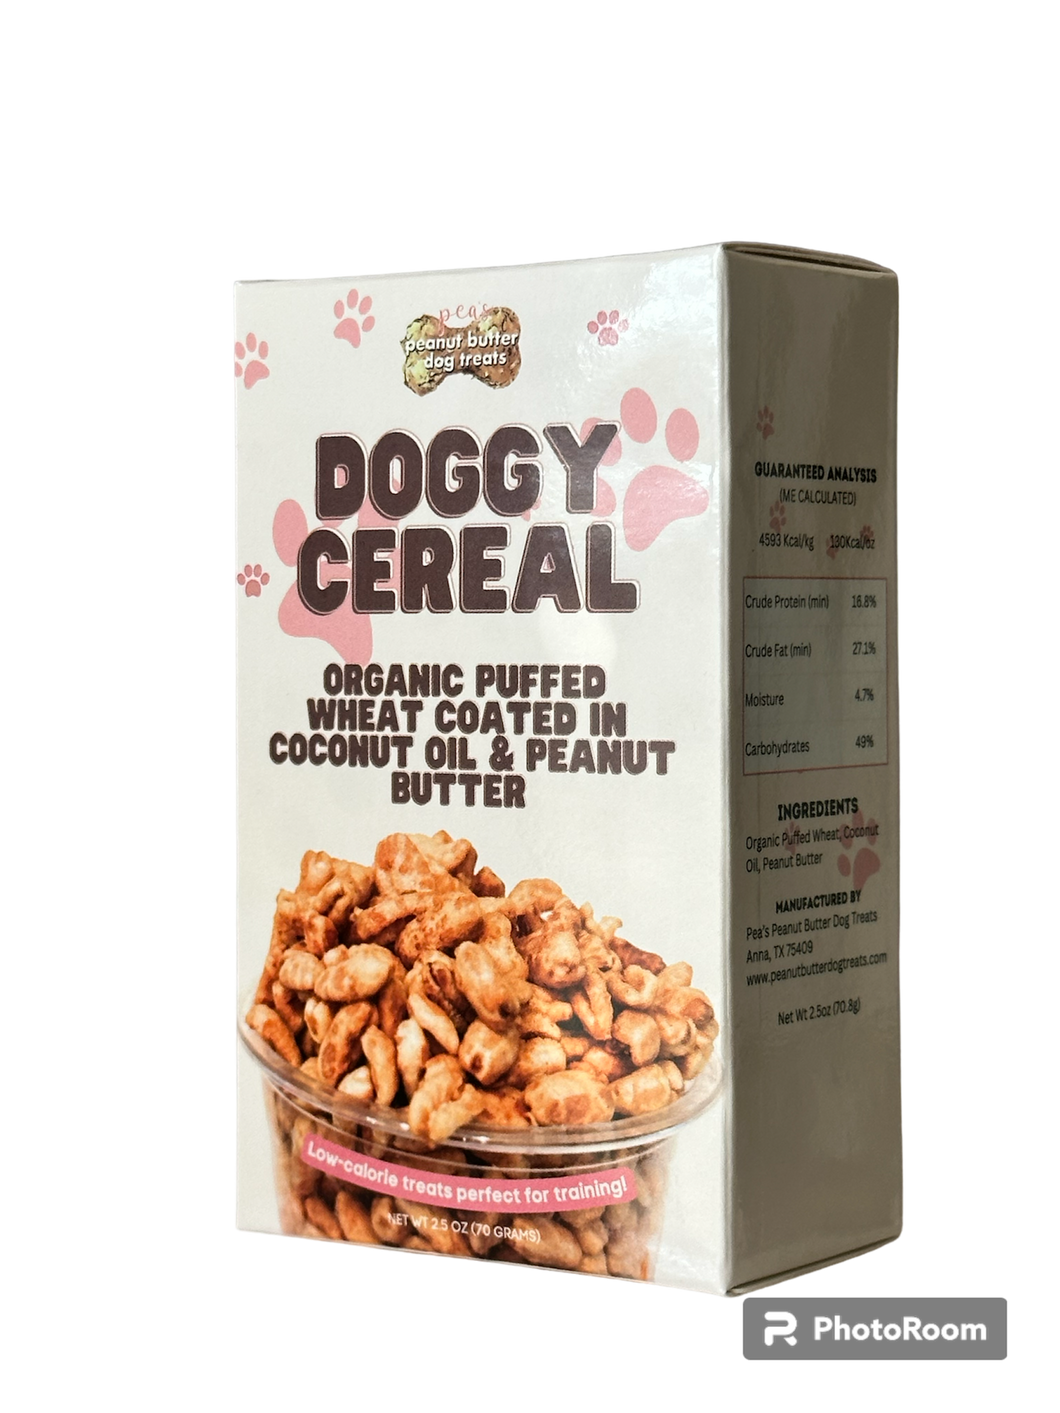 Doggy Cereal